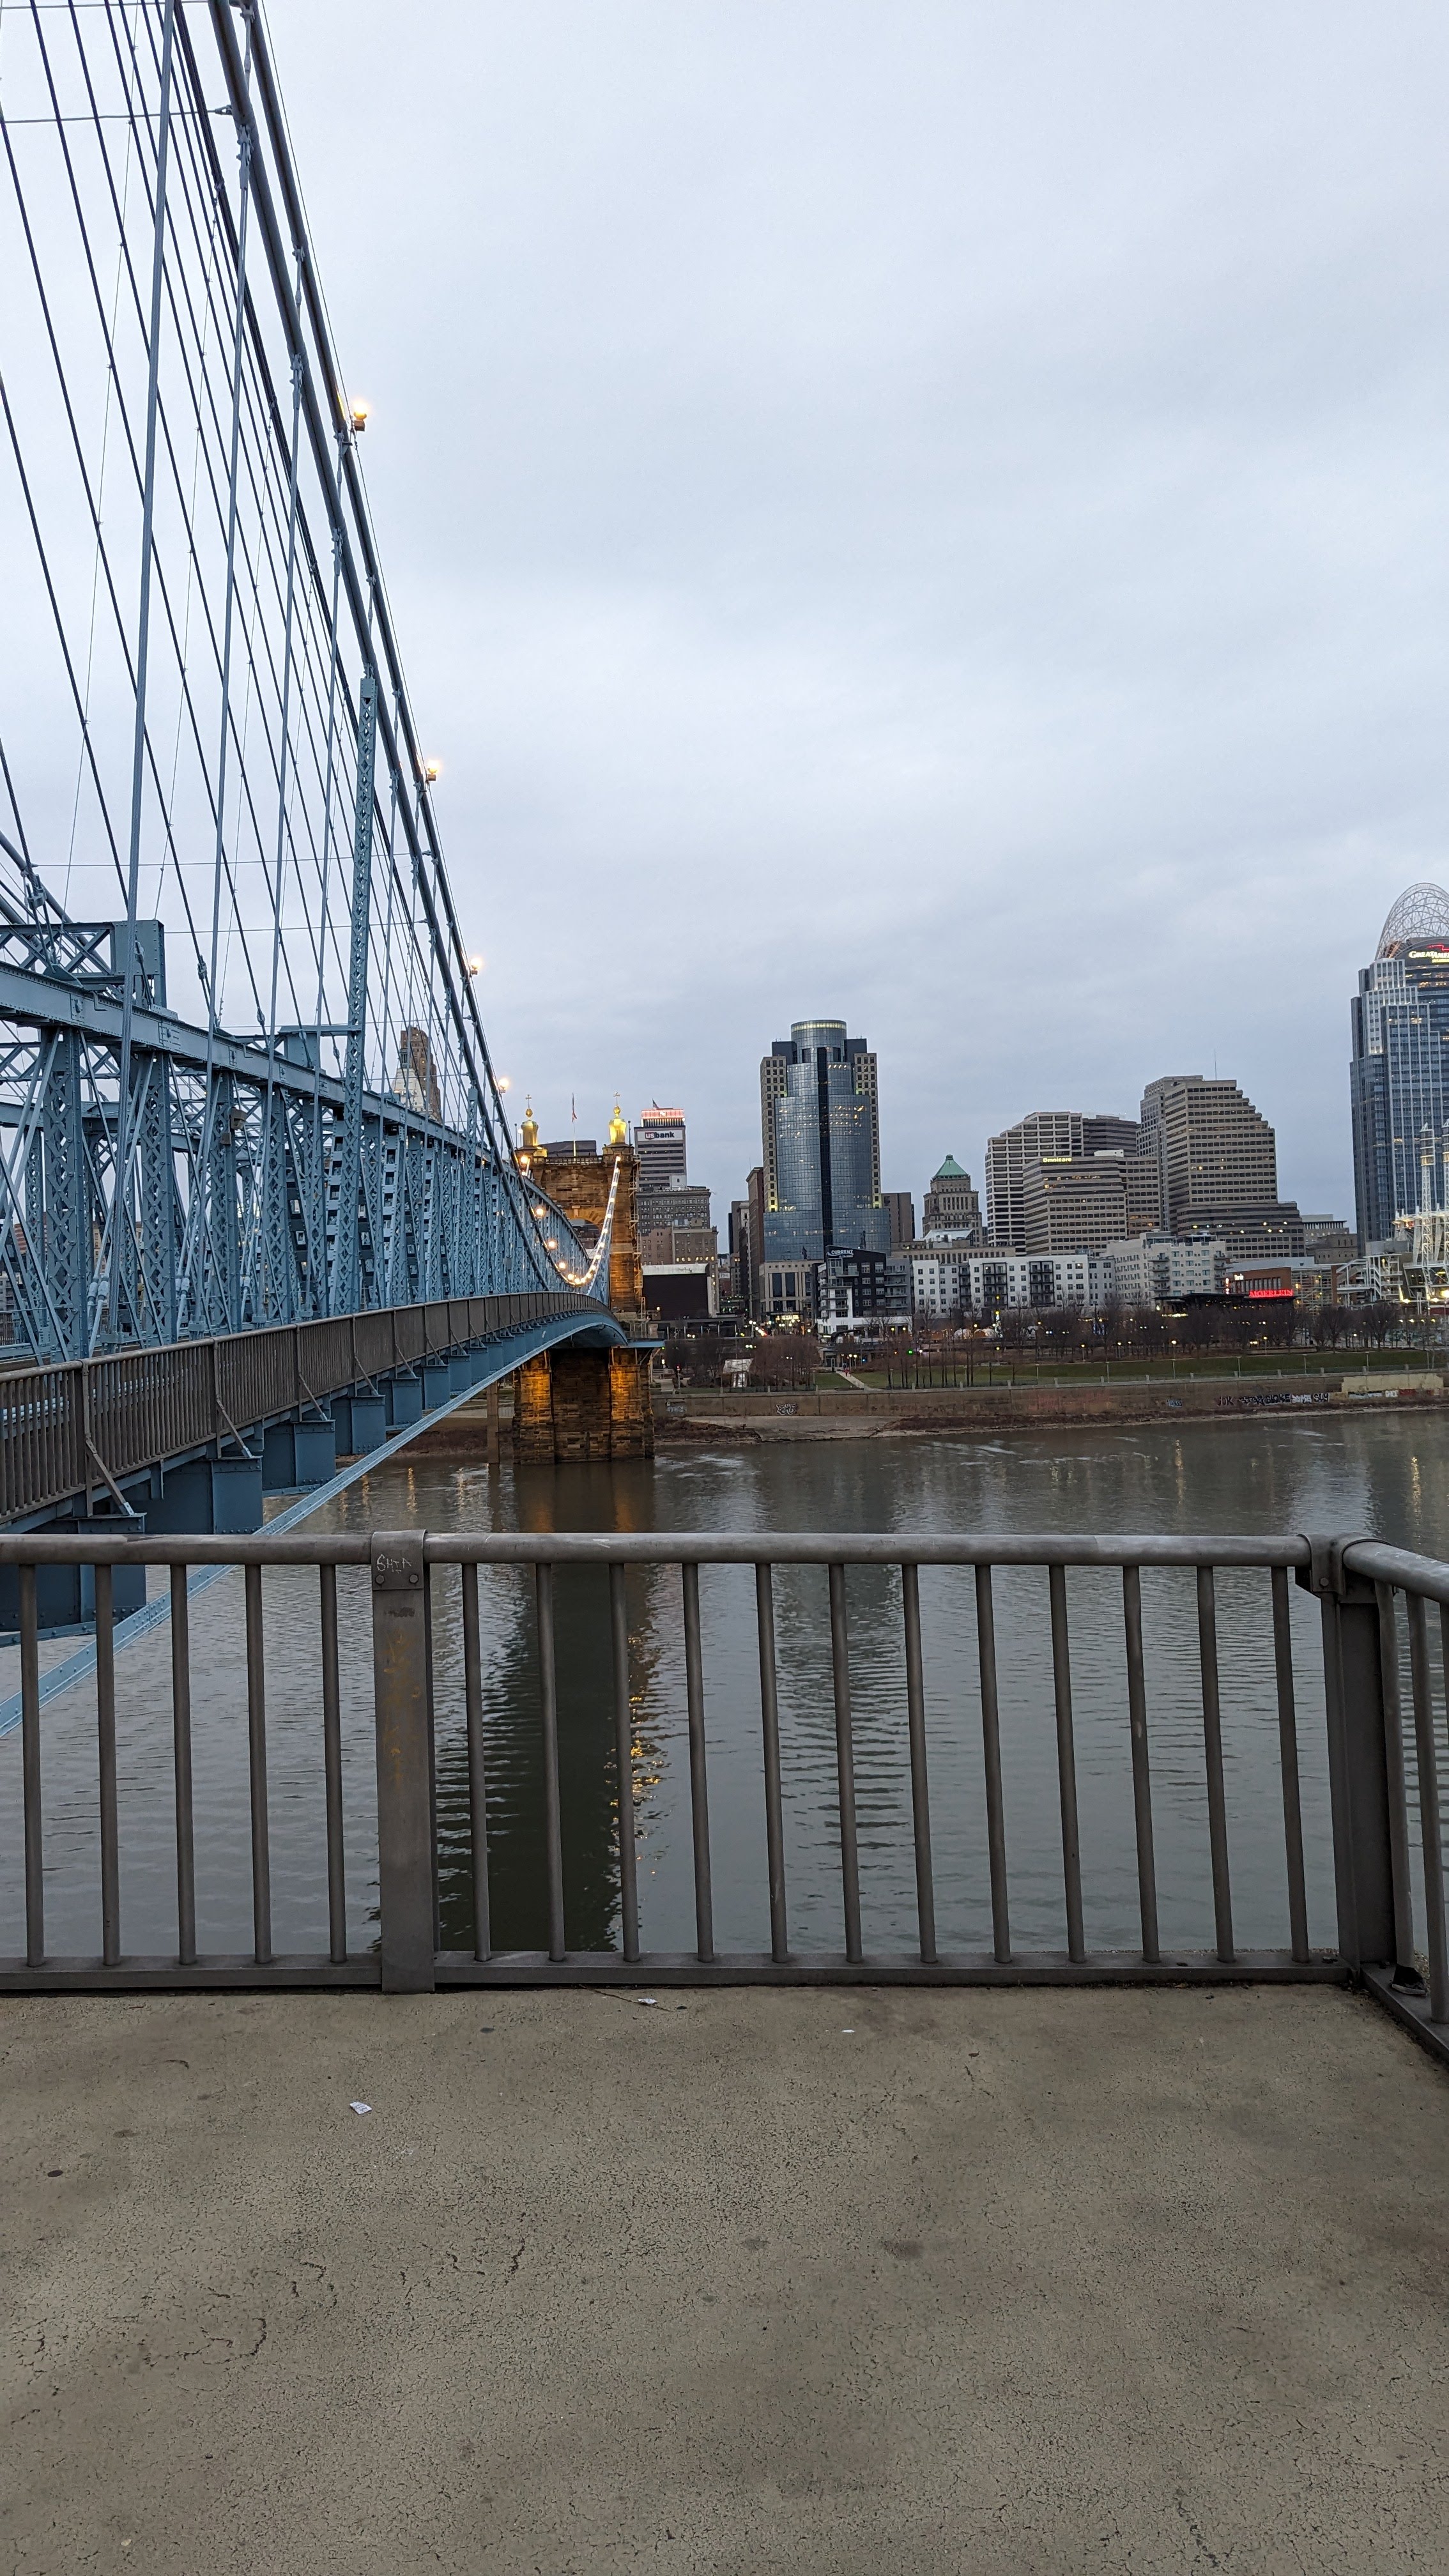 Looking north on the covington side of the Ohio river on the Robling Bridge, looking at the cincinnati skyline